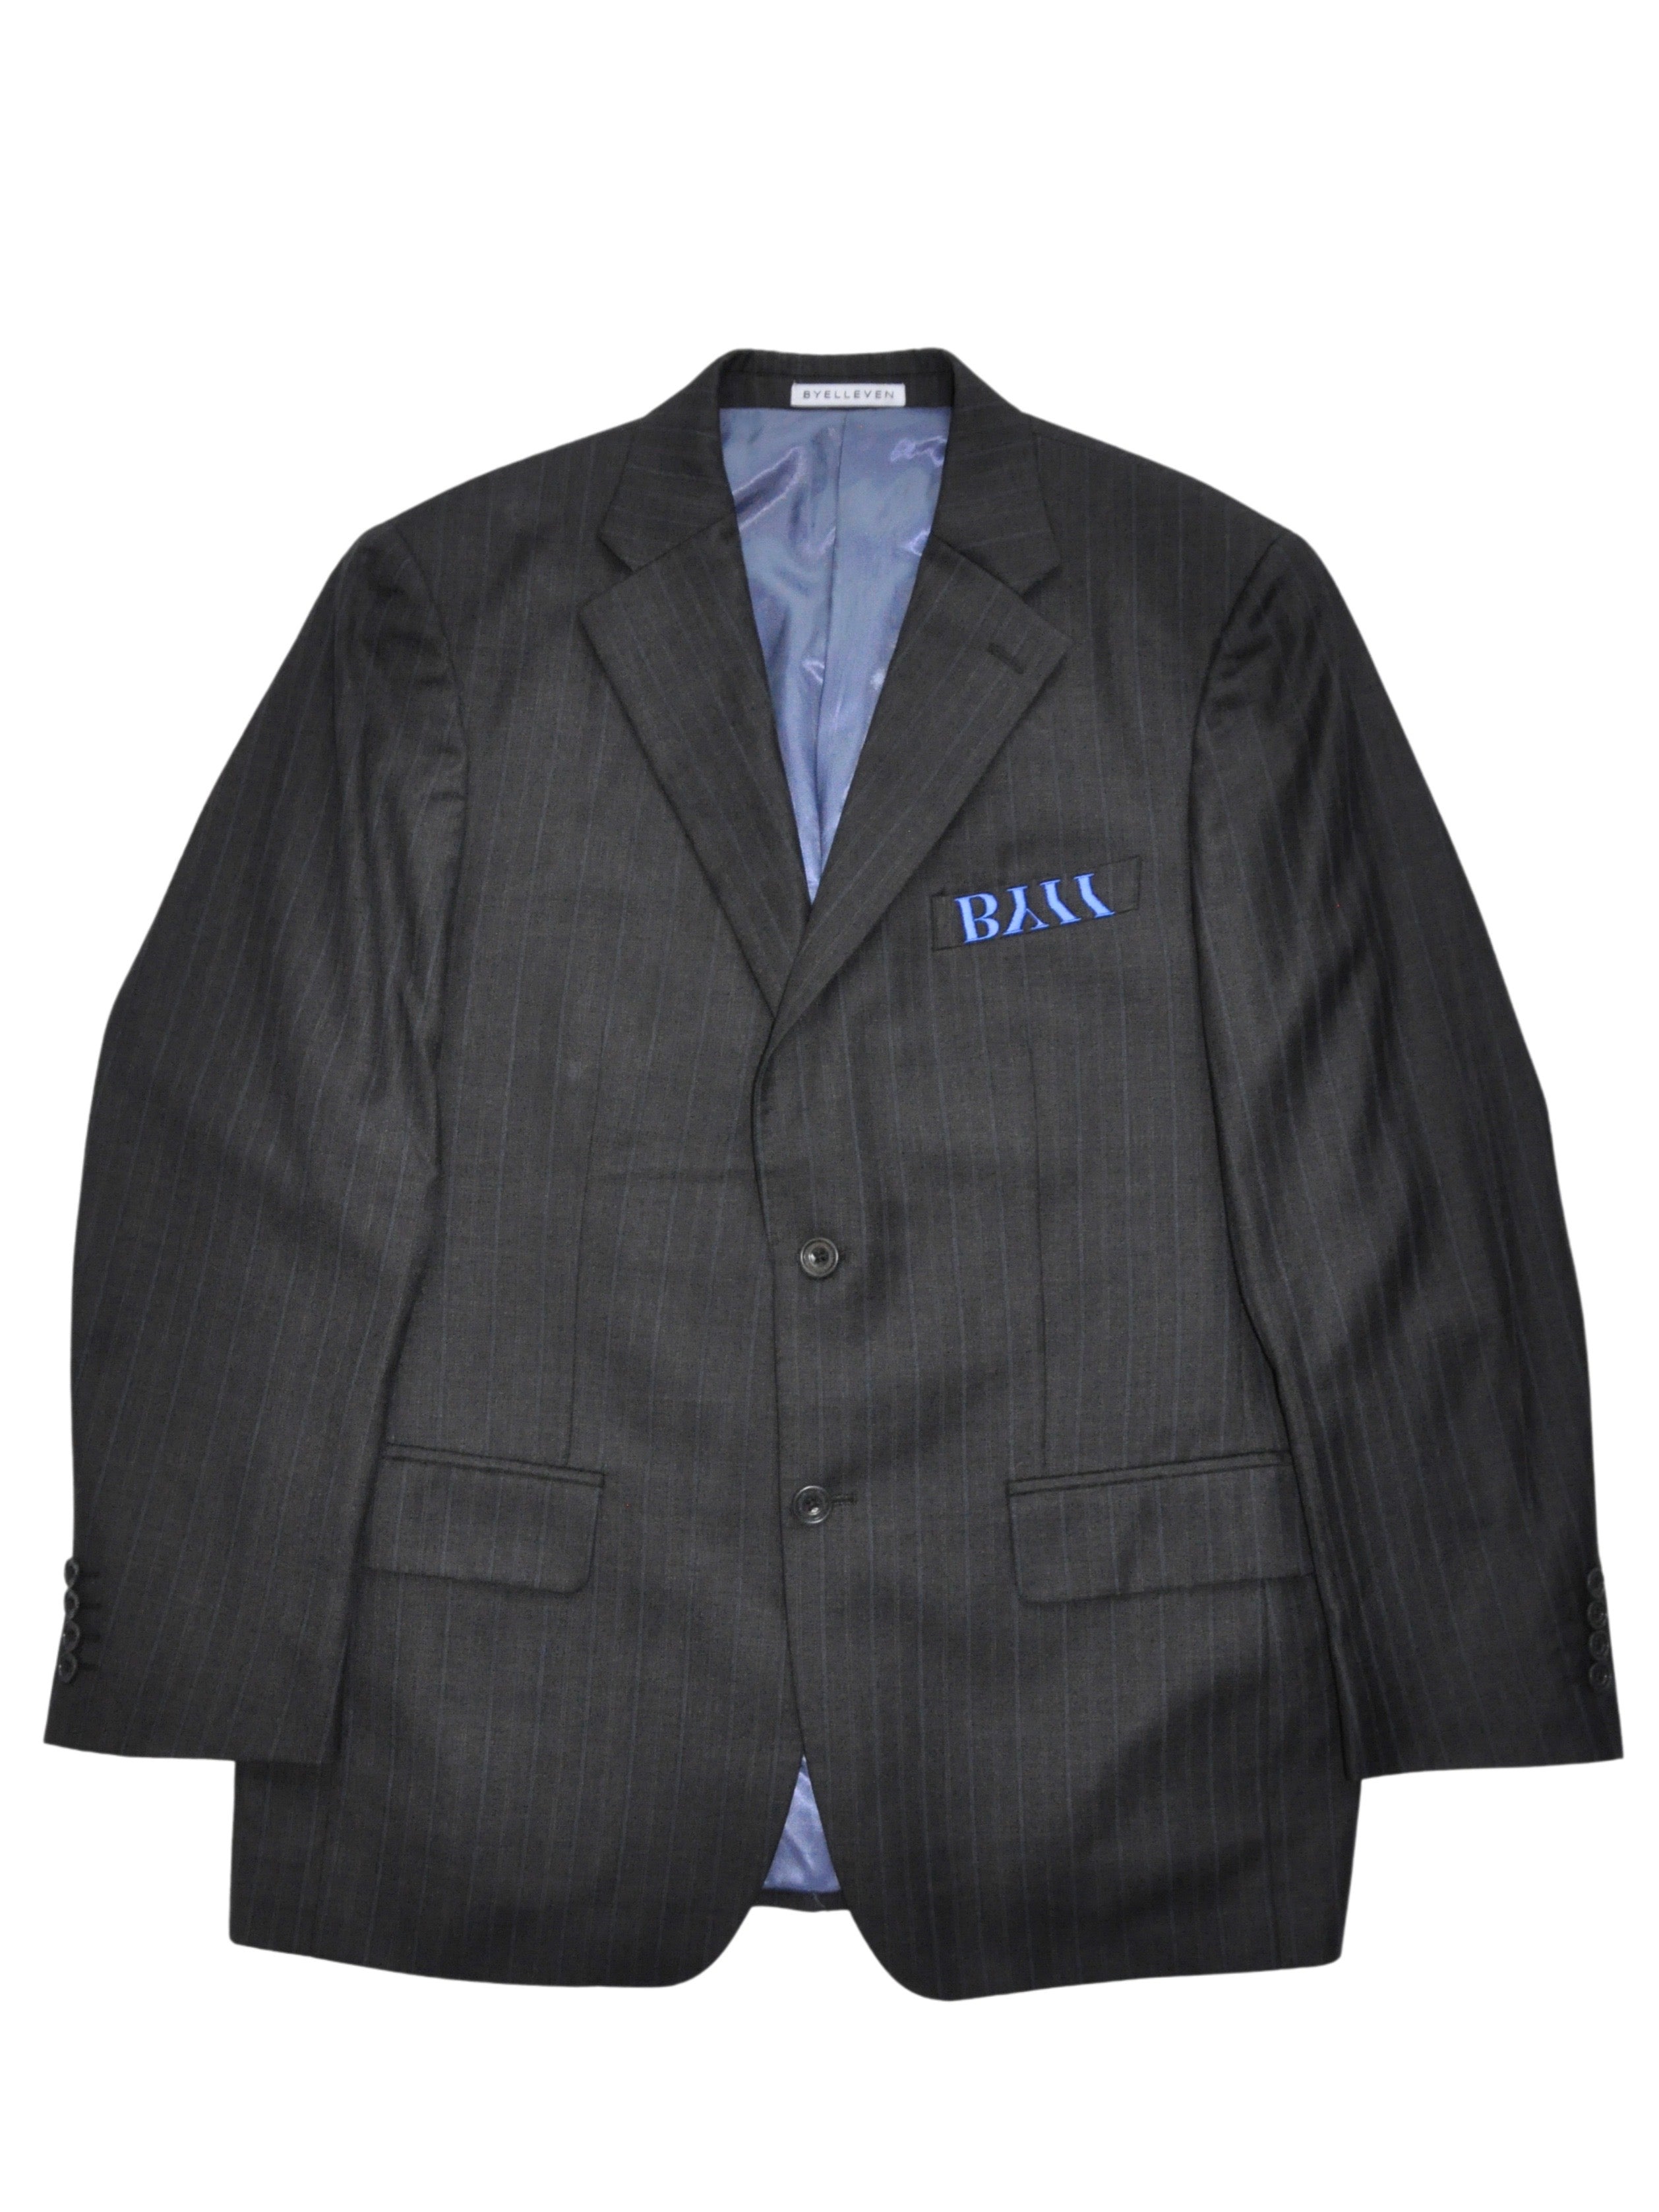 Reimagined Embroidered Logo Blazer - Charcoal and Blue Stripe